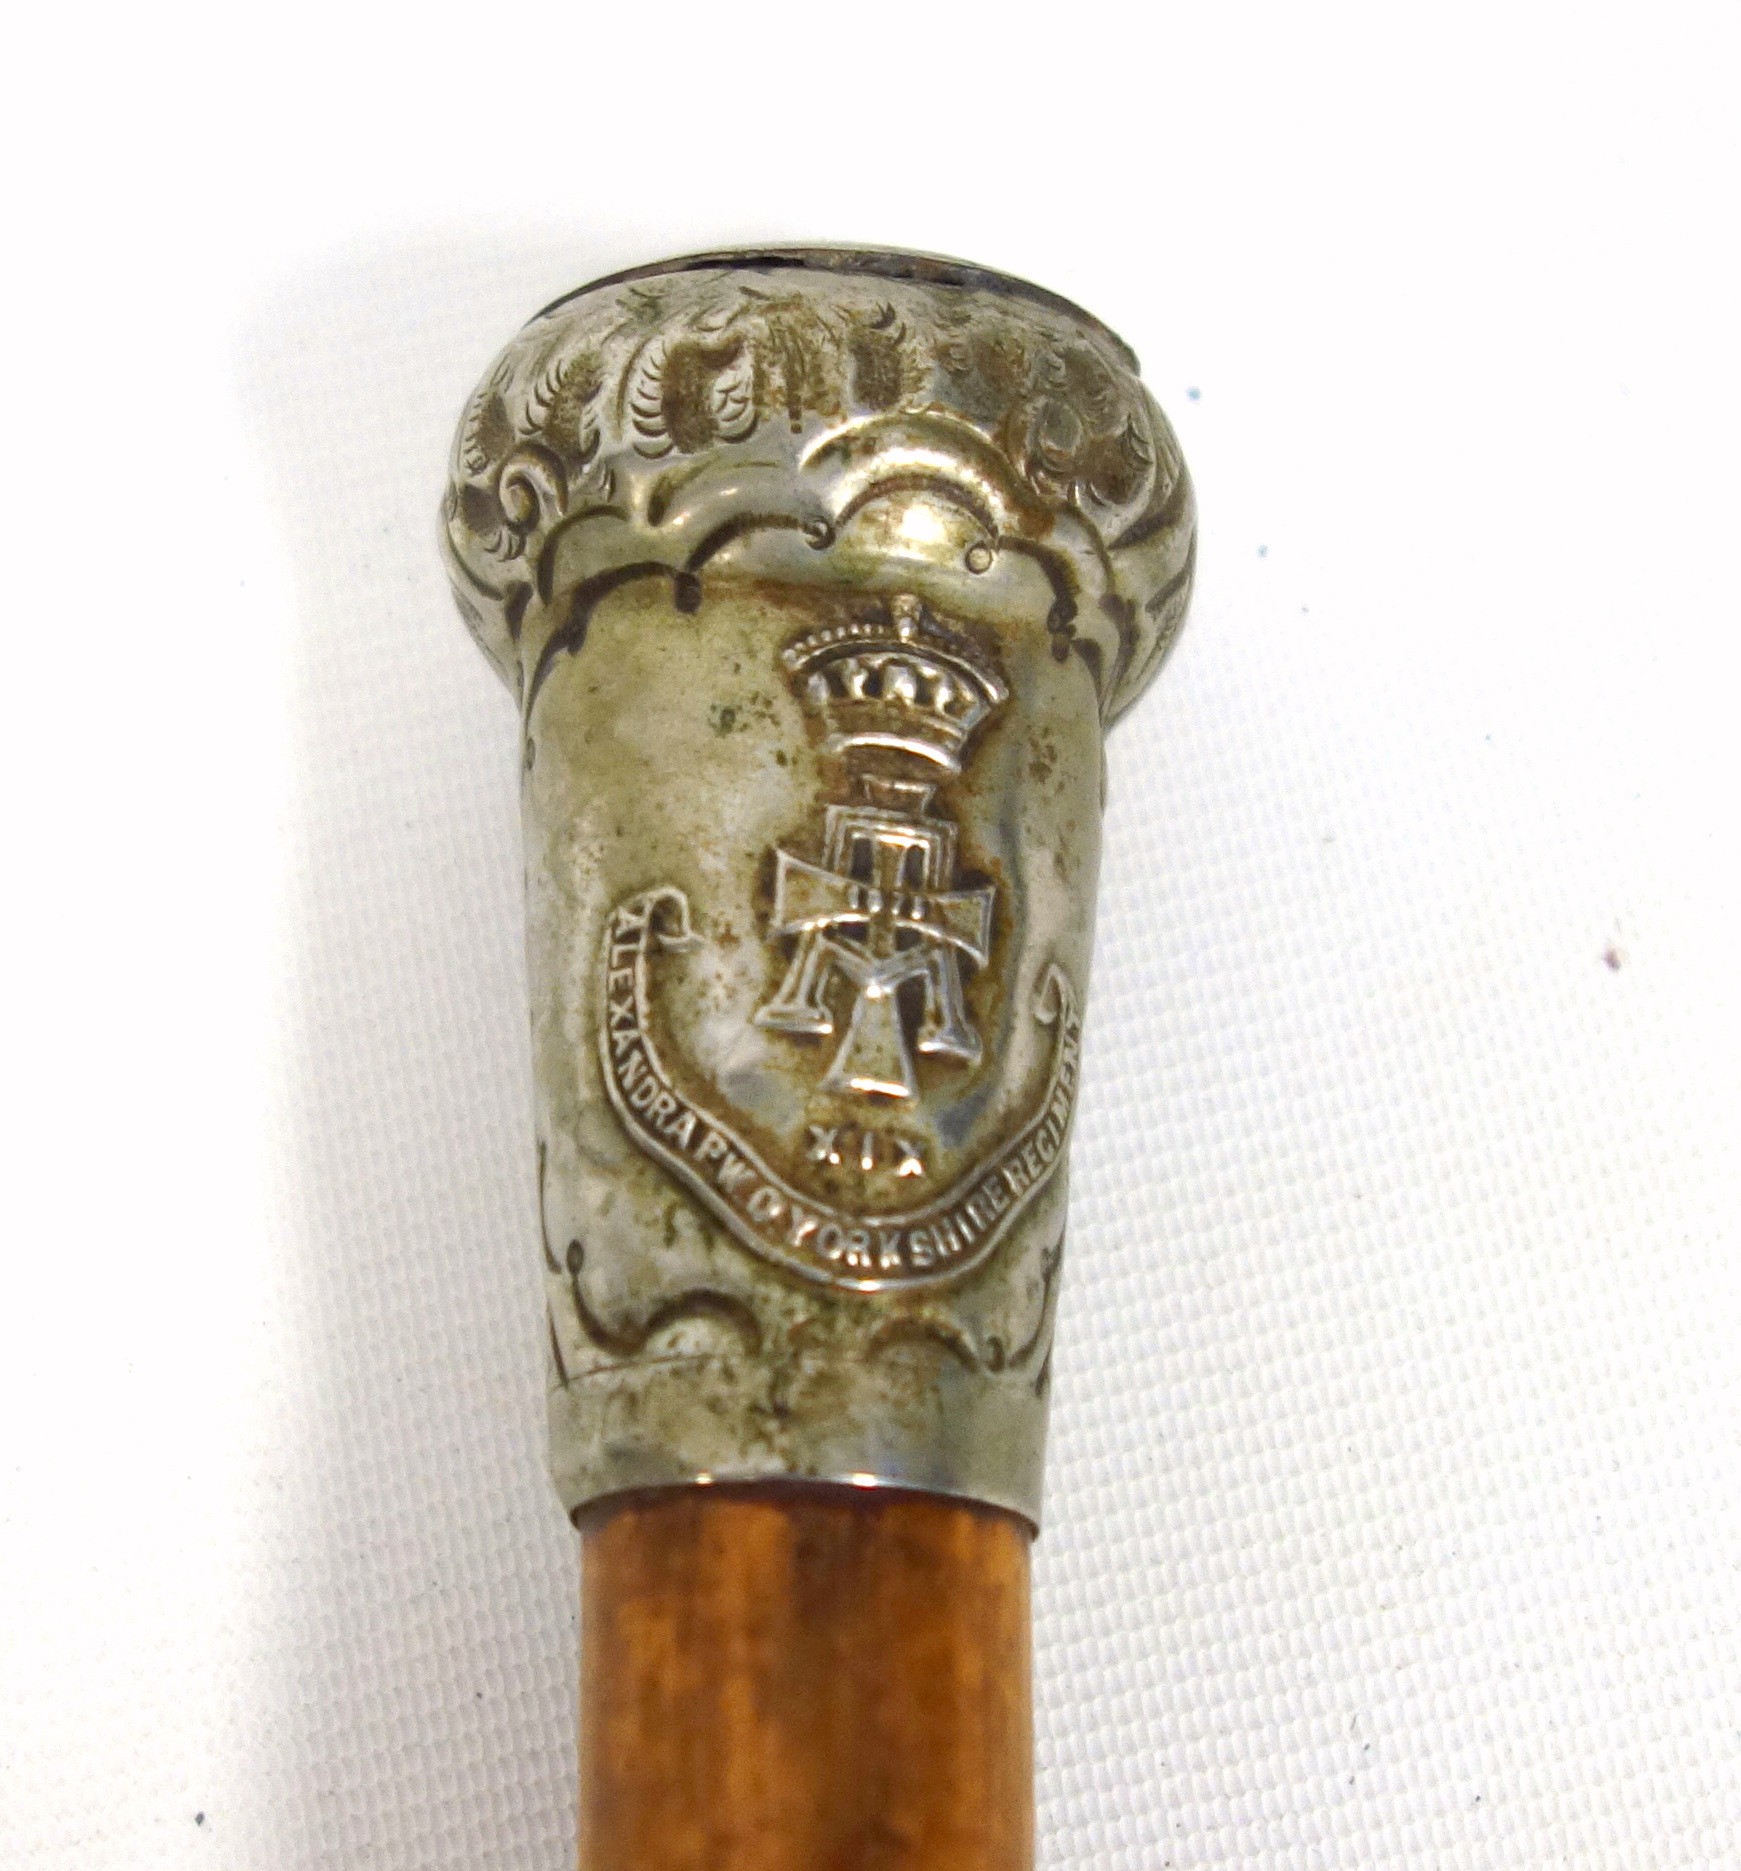 Victorian vertebrae cane with a plated domed handle, L.86.5cm, and a military hardwood cane, the - Image 4 of 4